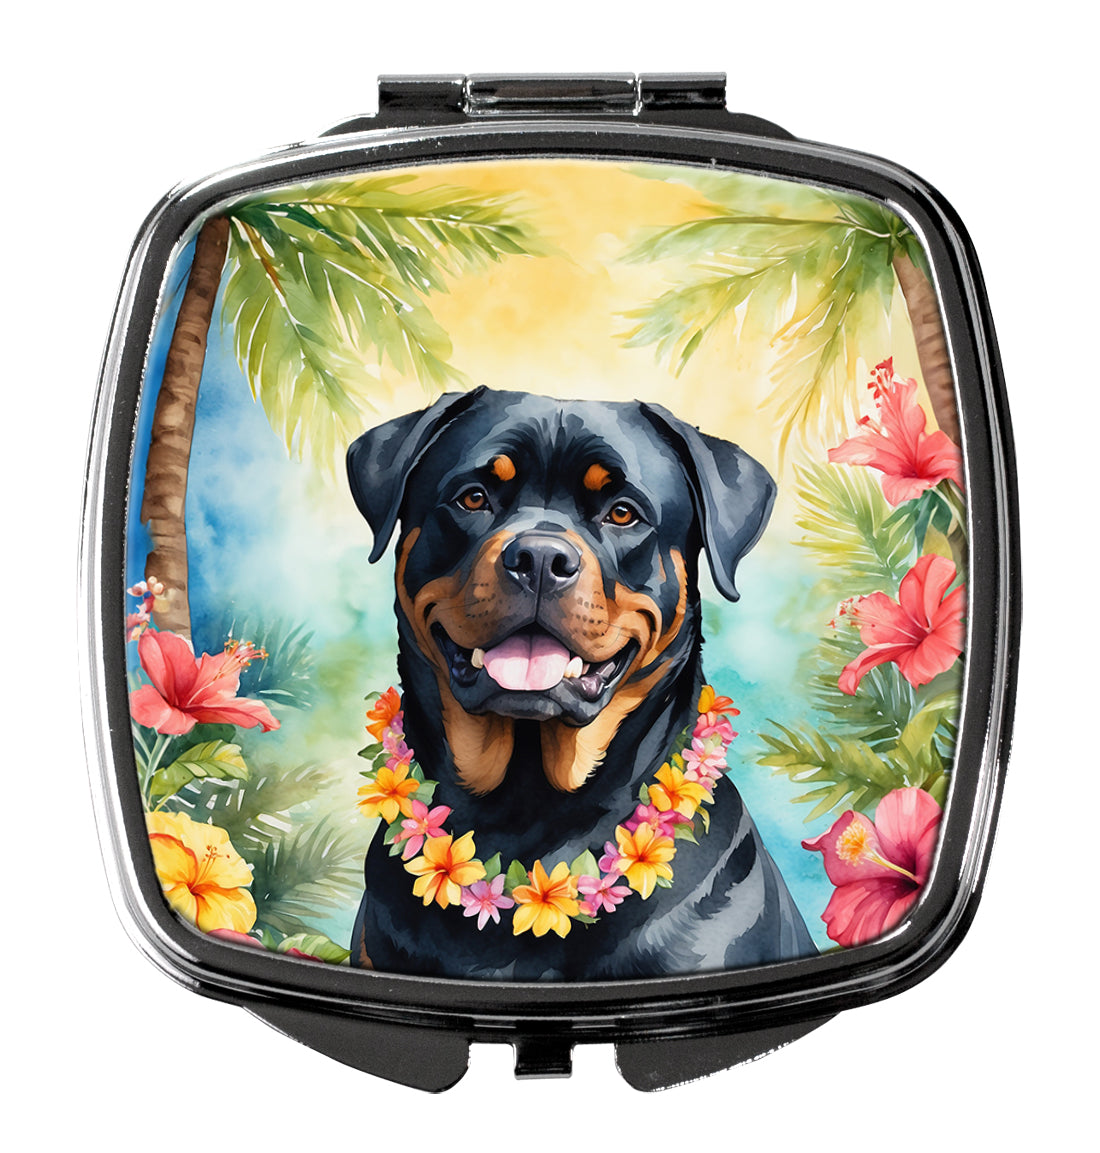 Buy this Rottweiler Luau Compact Mirror